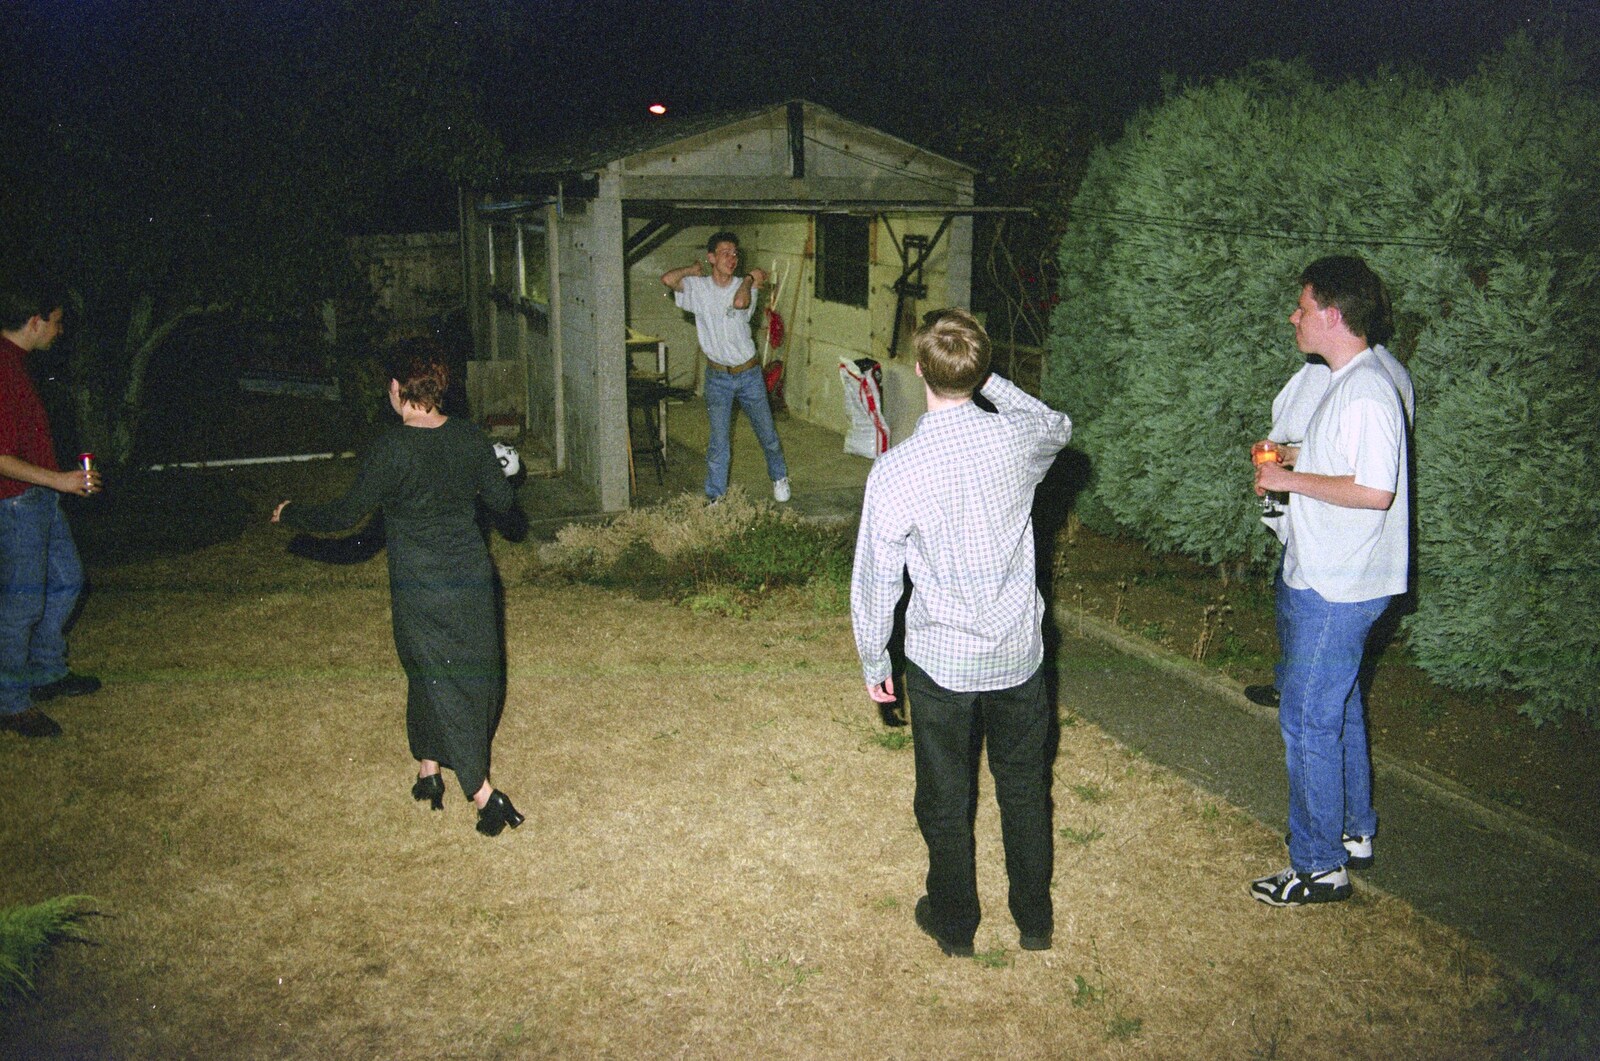 There are odd goings on in Andrew's garage from Andrew's CISU Party, and Nosher's Garden Barbeque, Ipswich and Brome, Suffolk - June 10th 1998